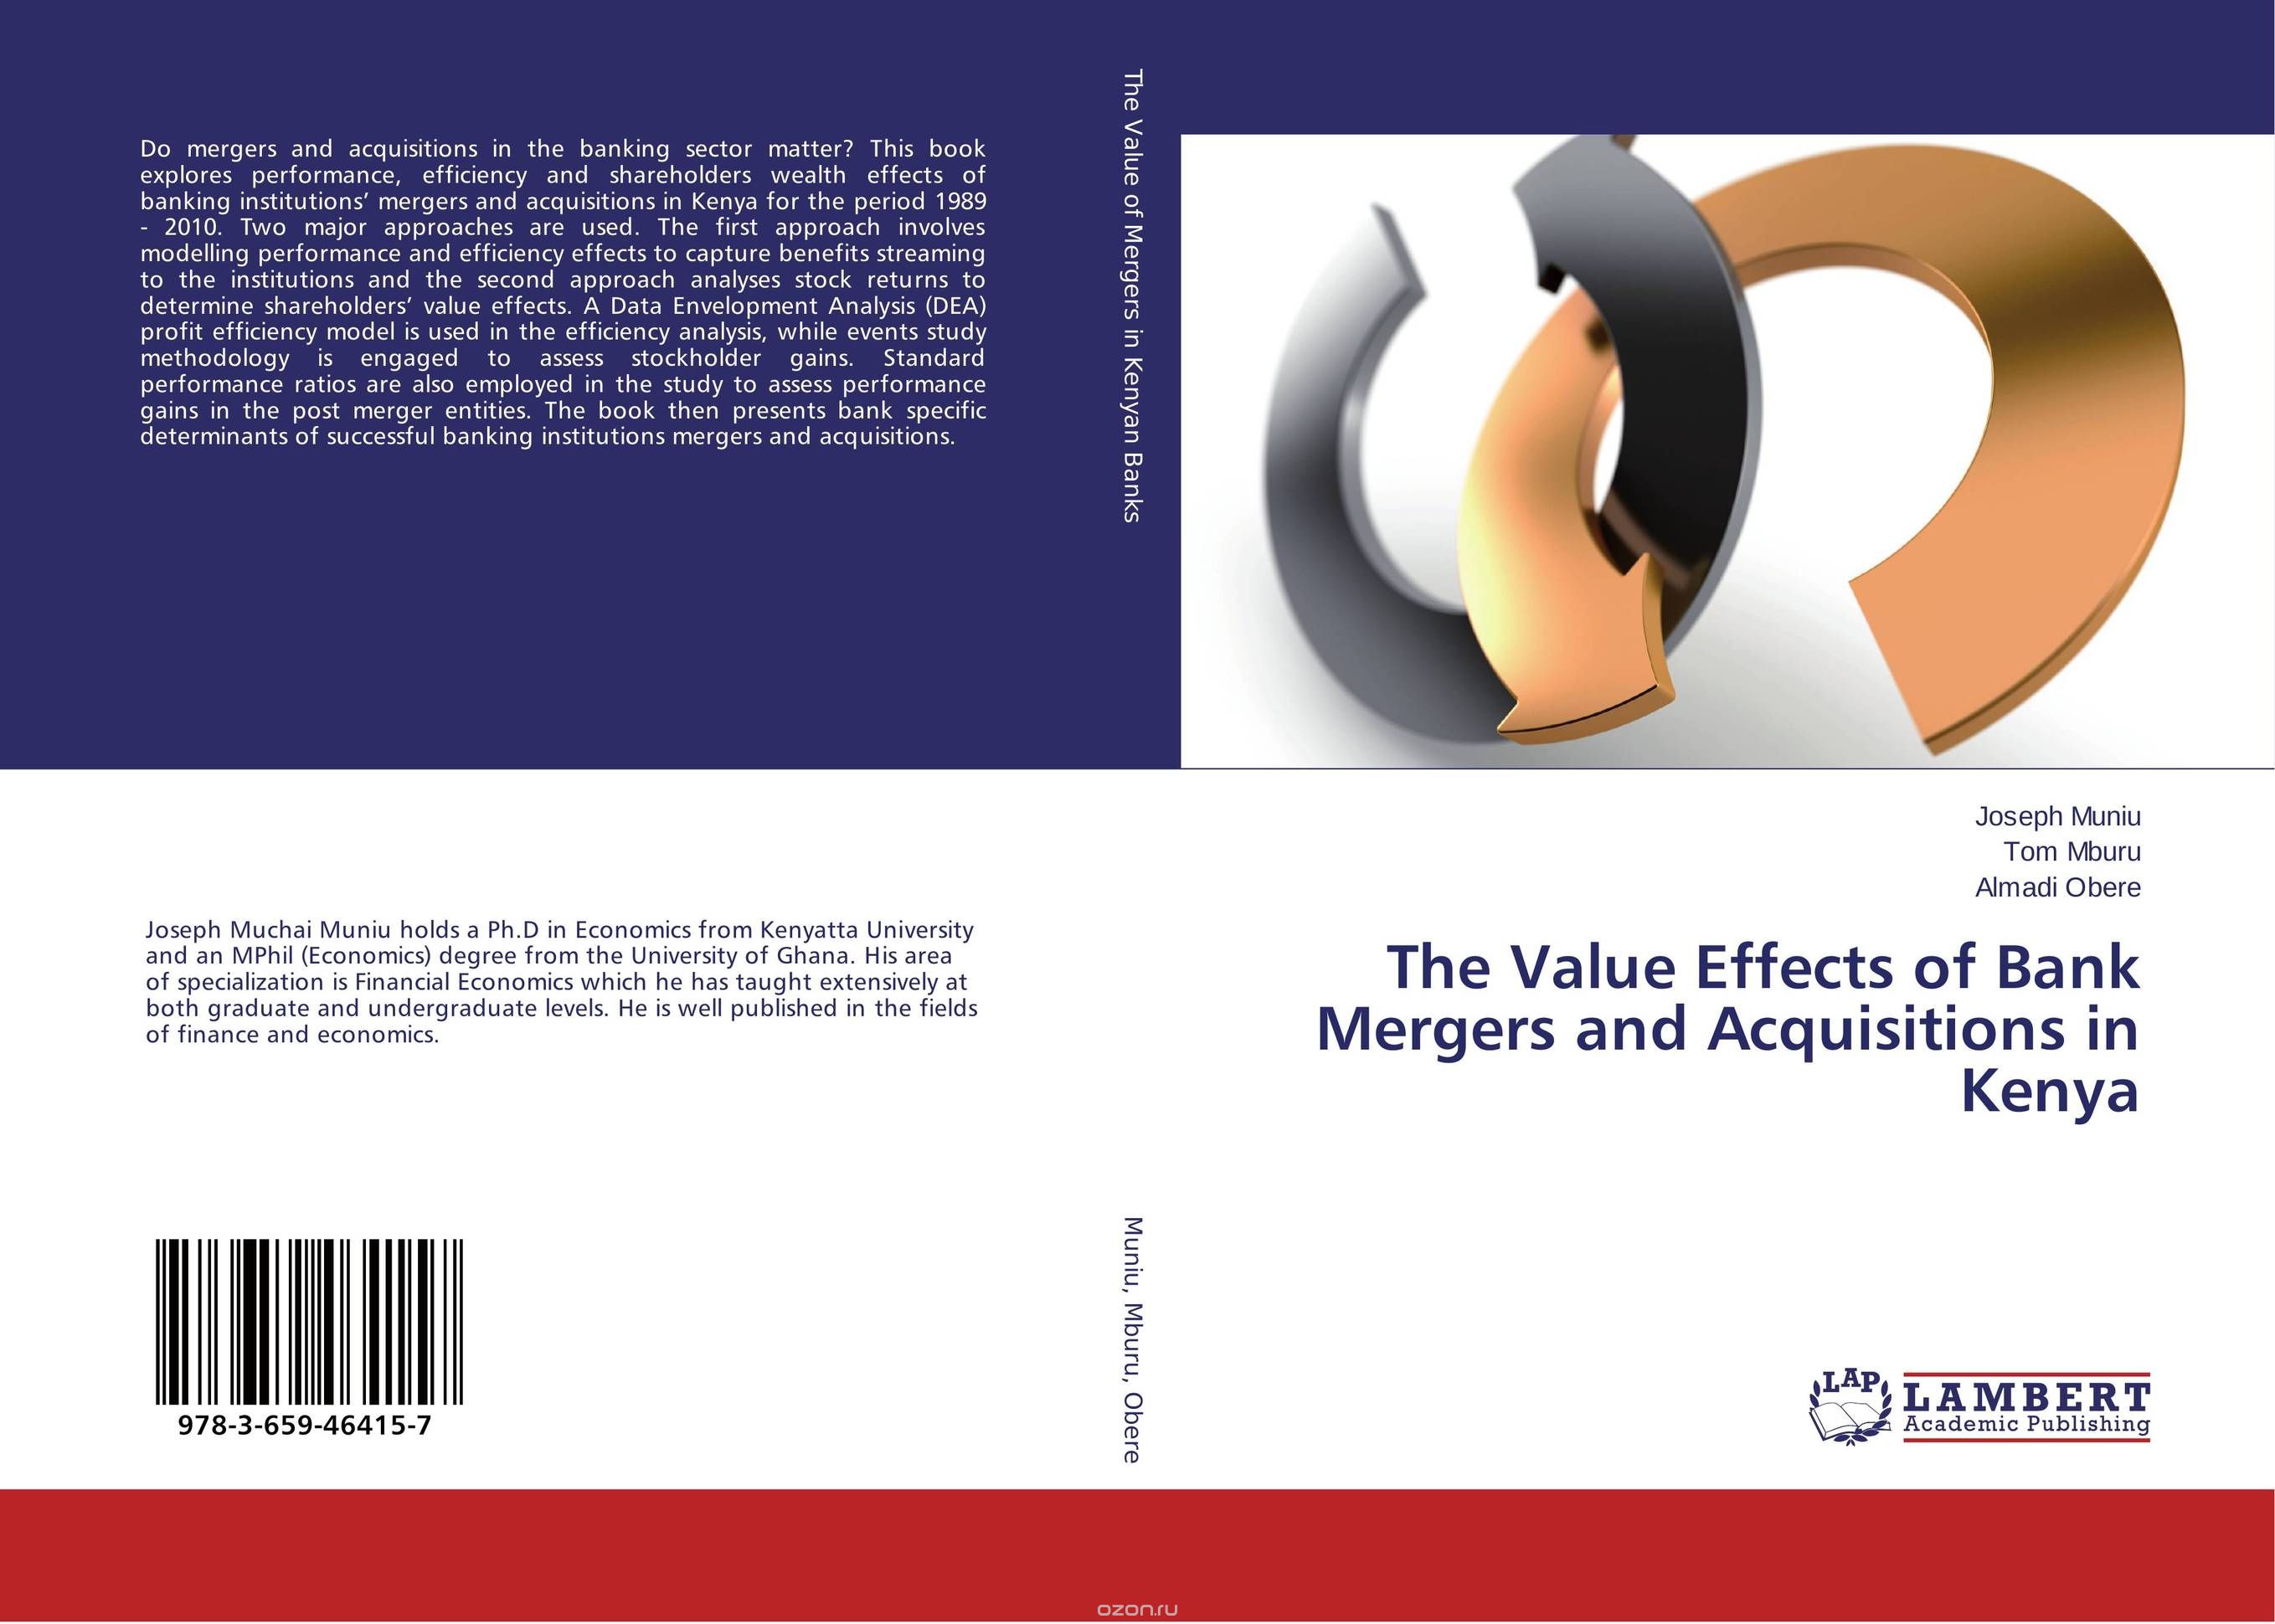 The Value Effects of Bank Mergers and Acquisitions in Kenya